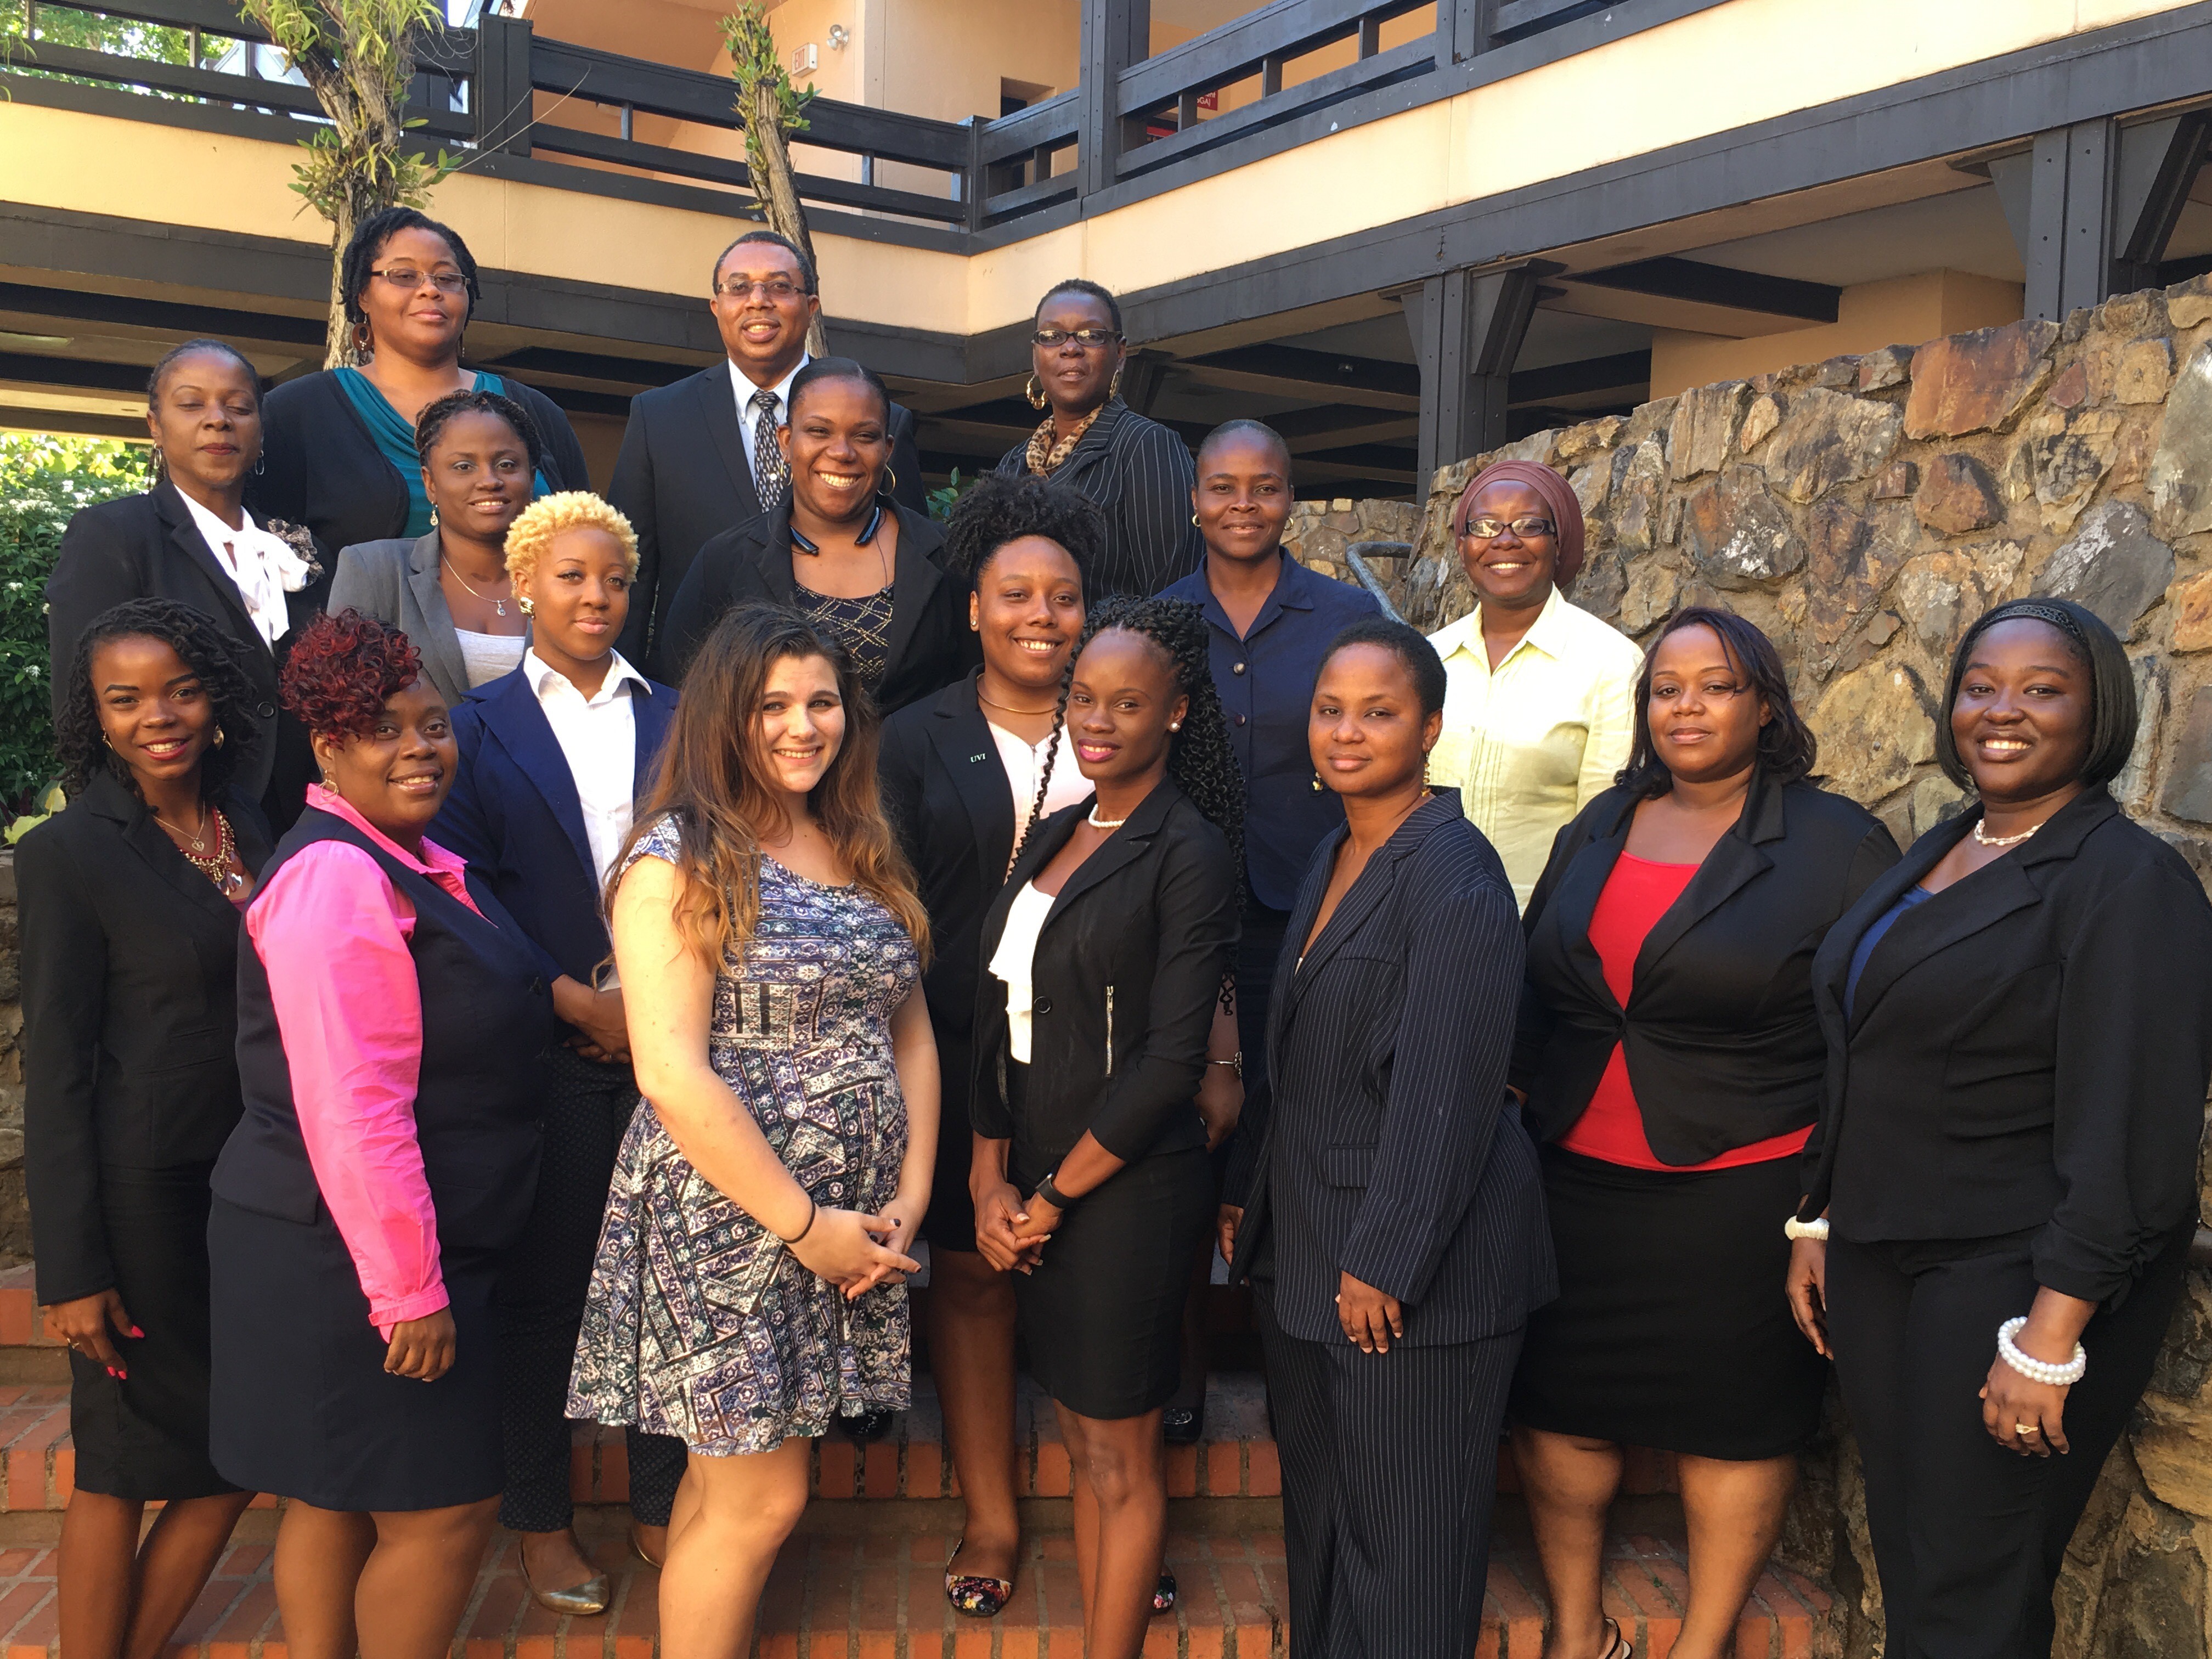 The UVI Call Center team poses for a photo on the University of the Virgin Islands Albert A. Sheen Campus, St. Croix.